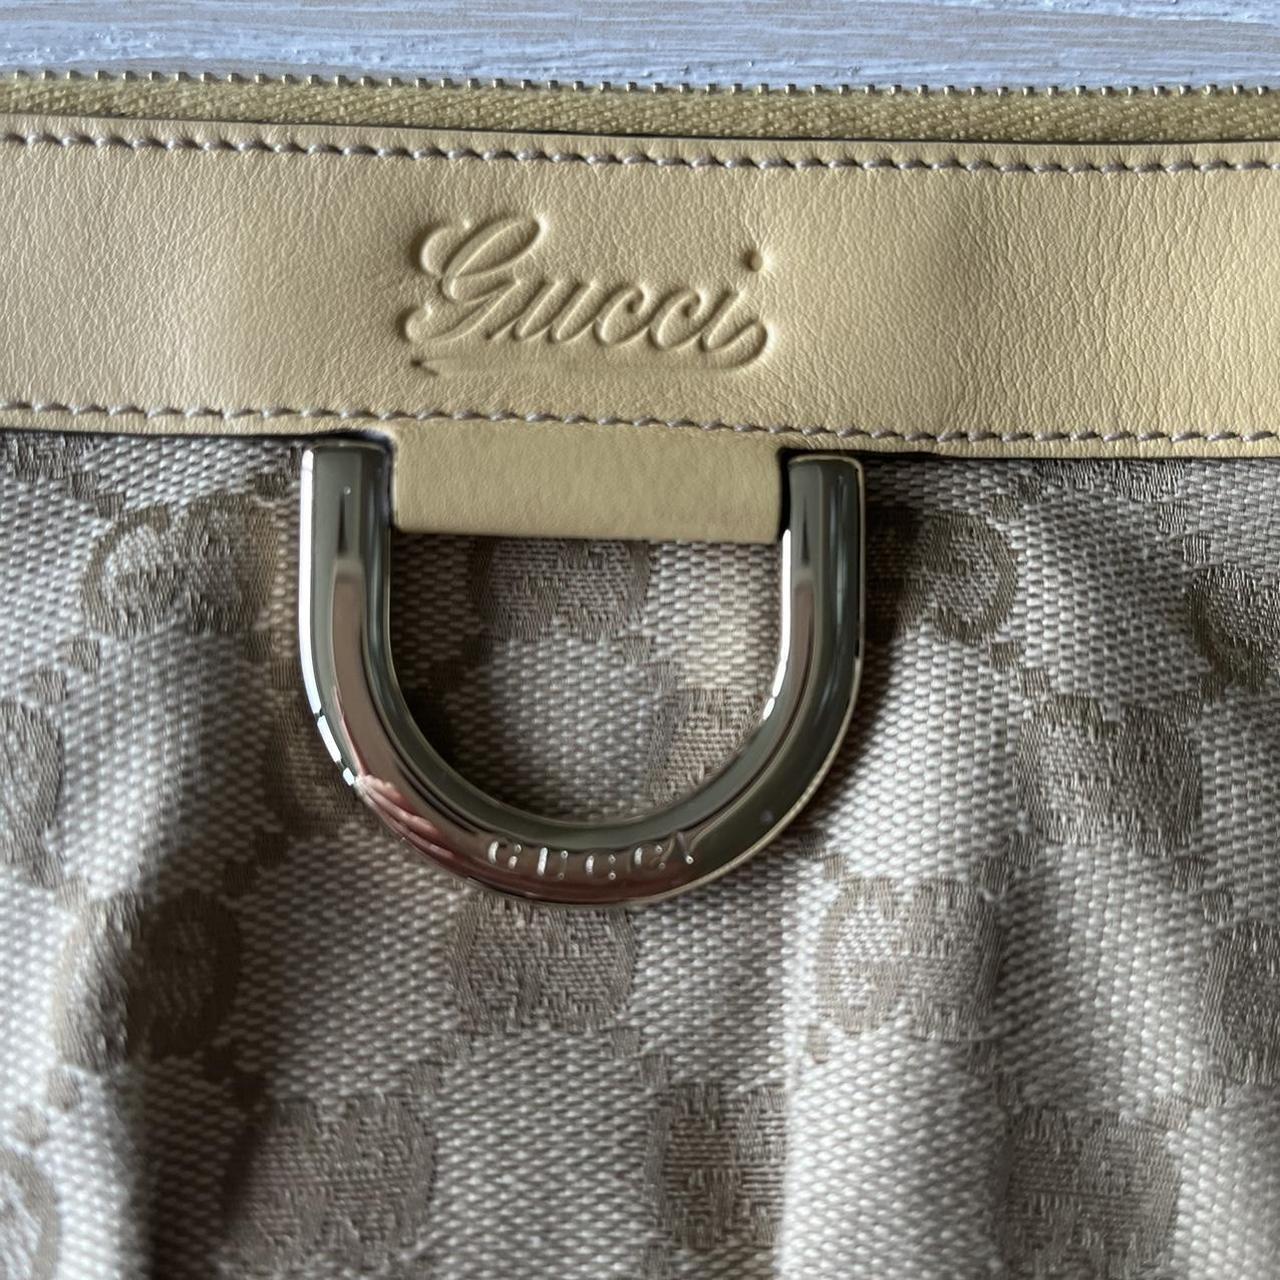 Gucci Women's Yellow and Brown Bag (2)